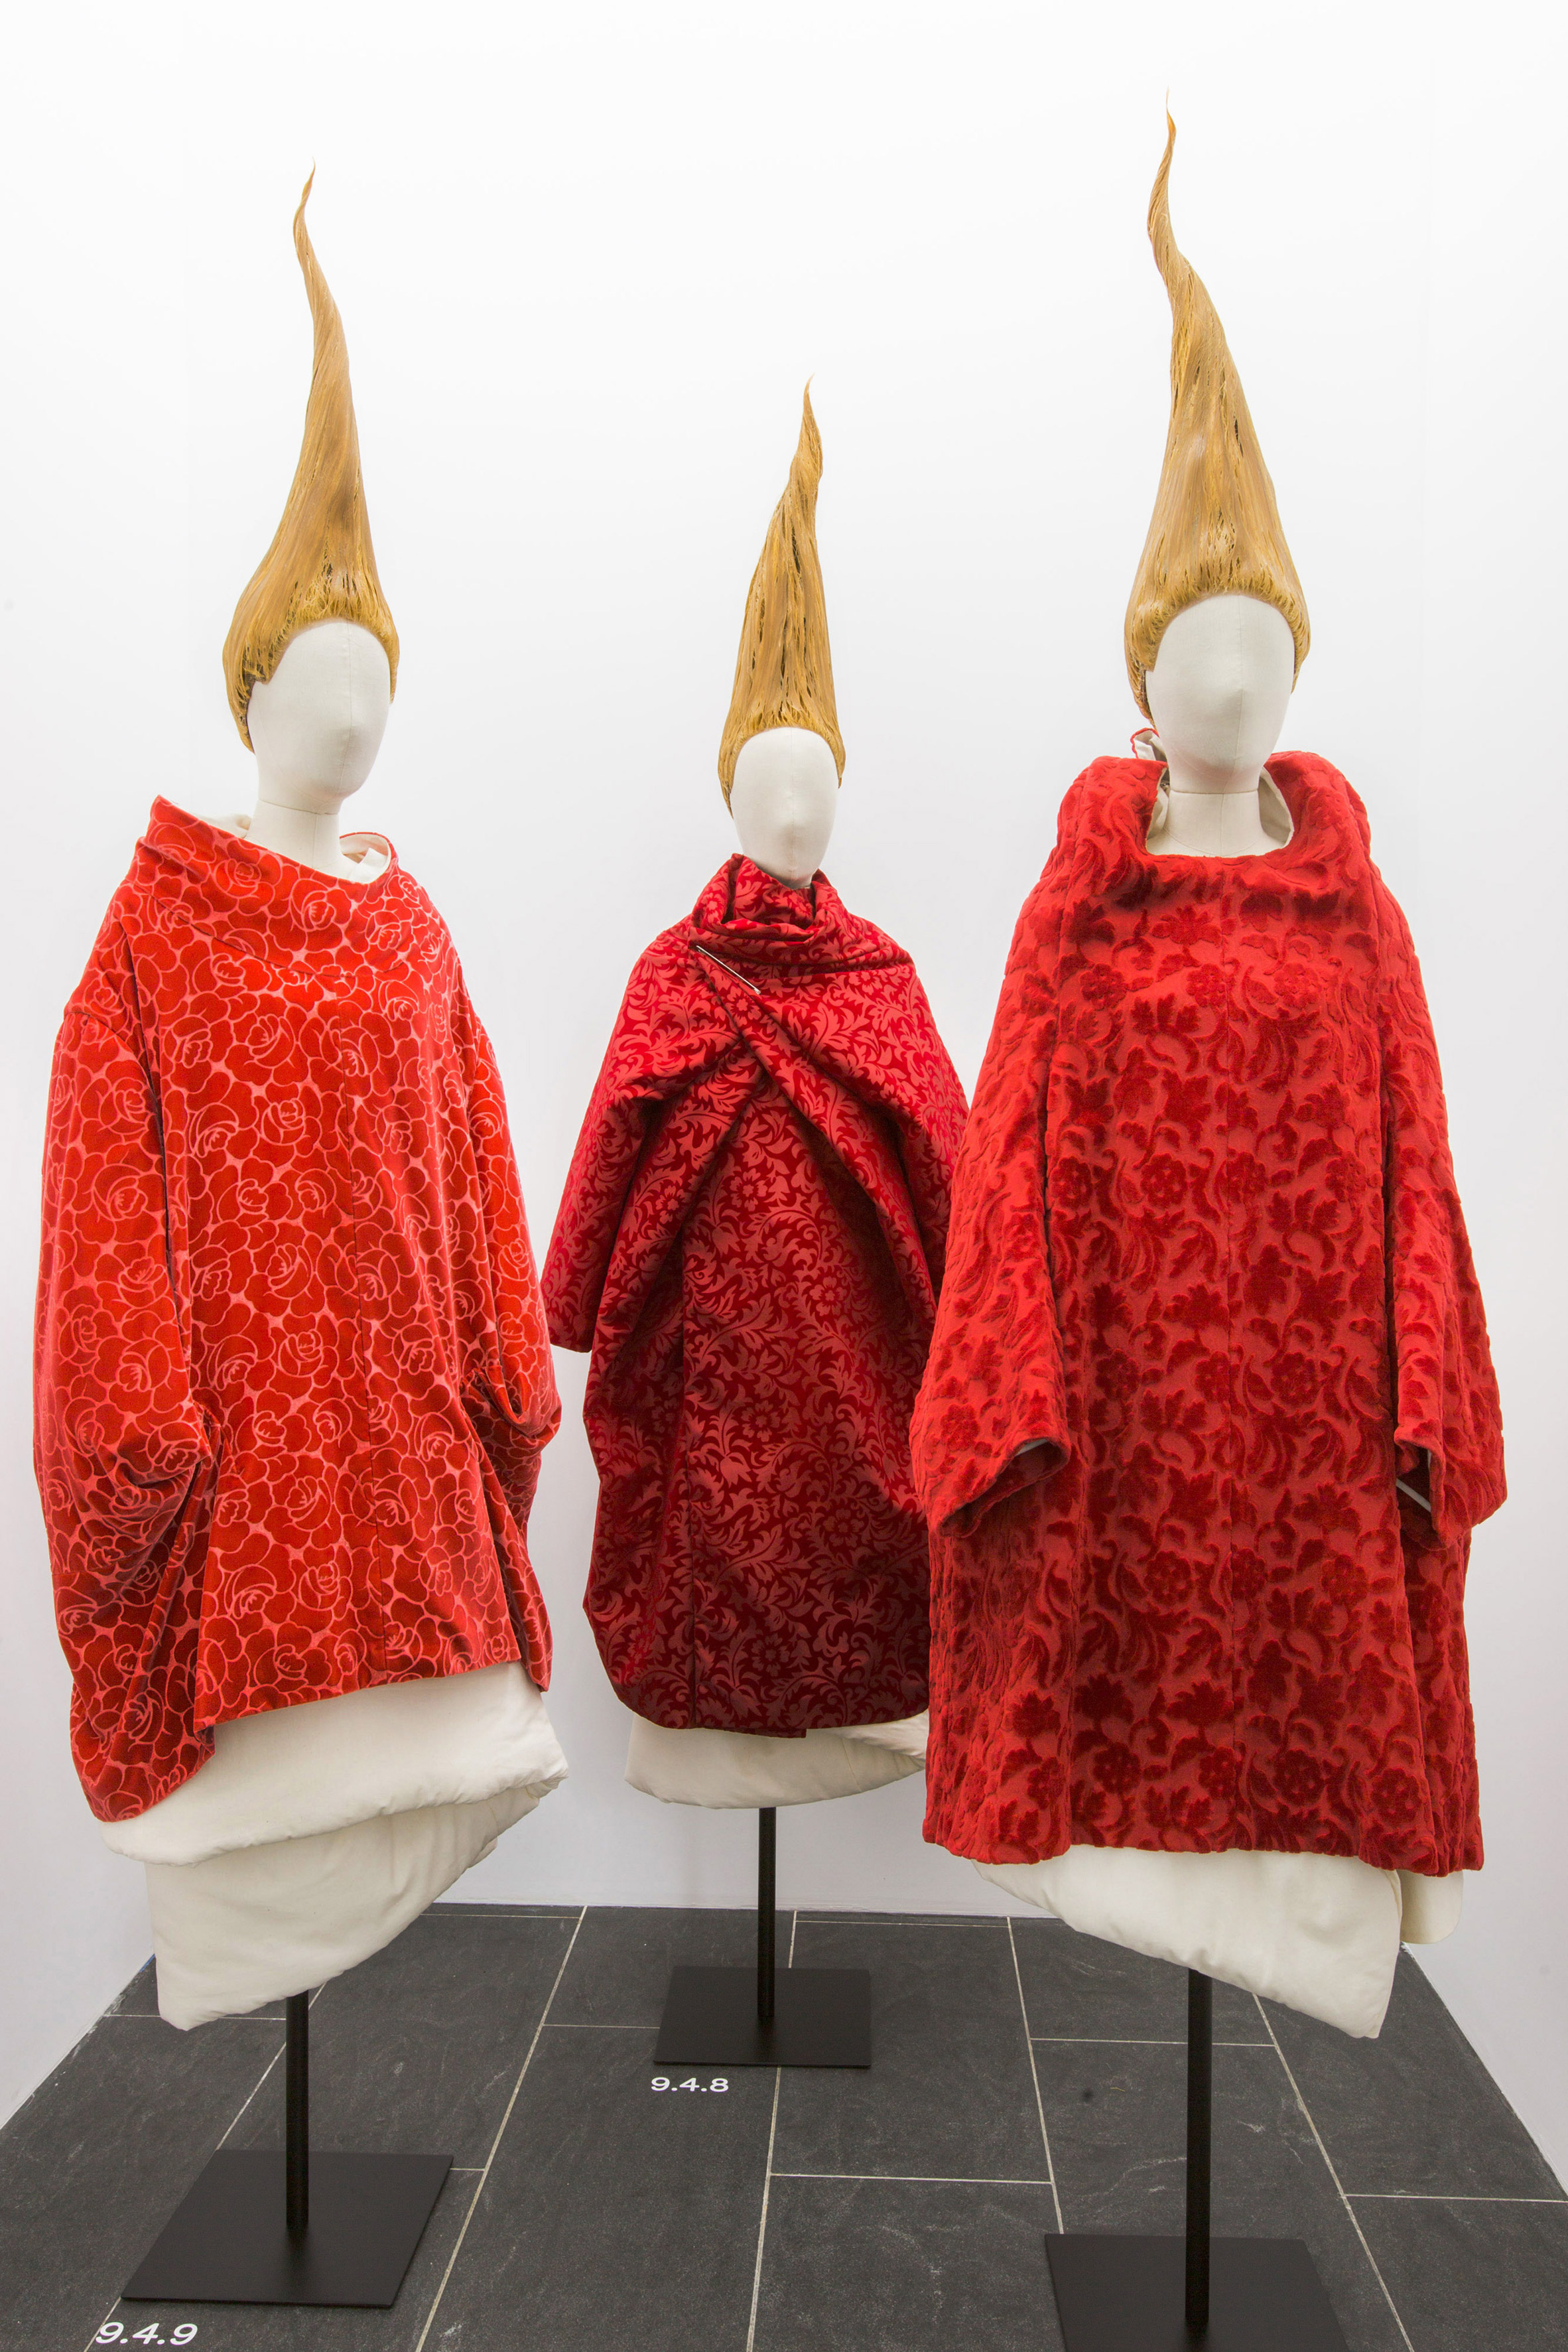 Comme des Garçons fashion exhibition at The Met in New York; Gallery View, Clothes/Not Clothes: War/Peace